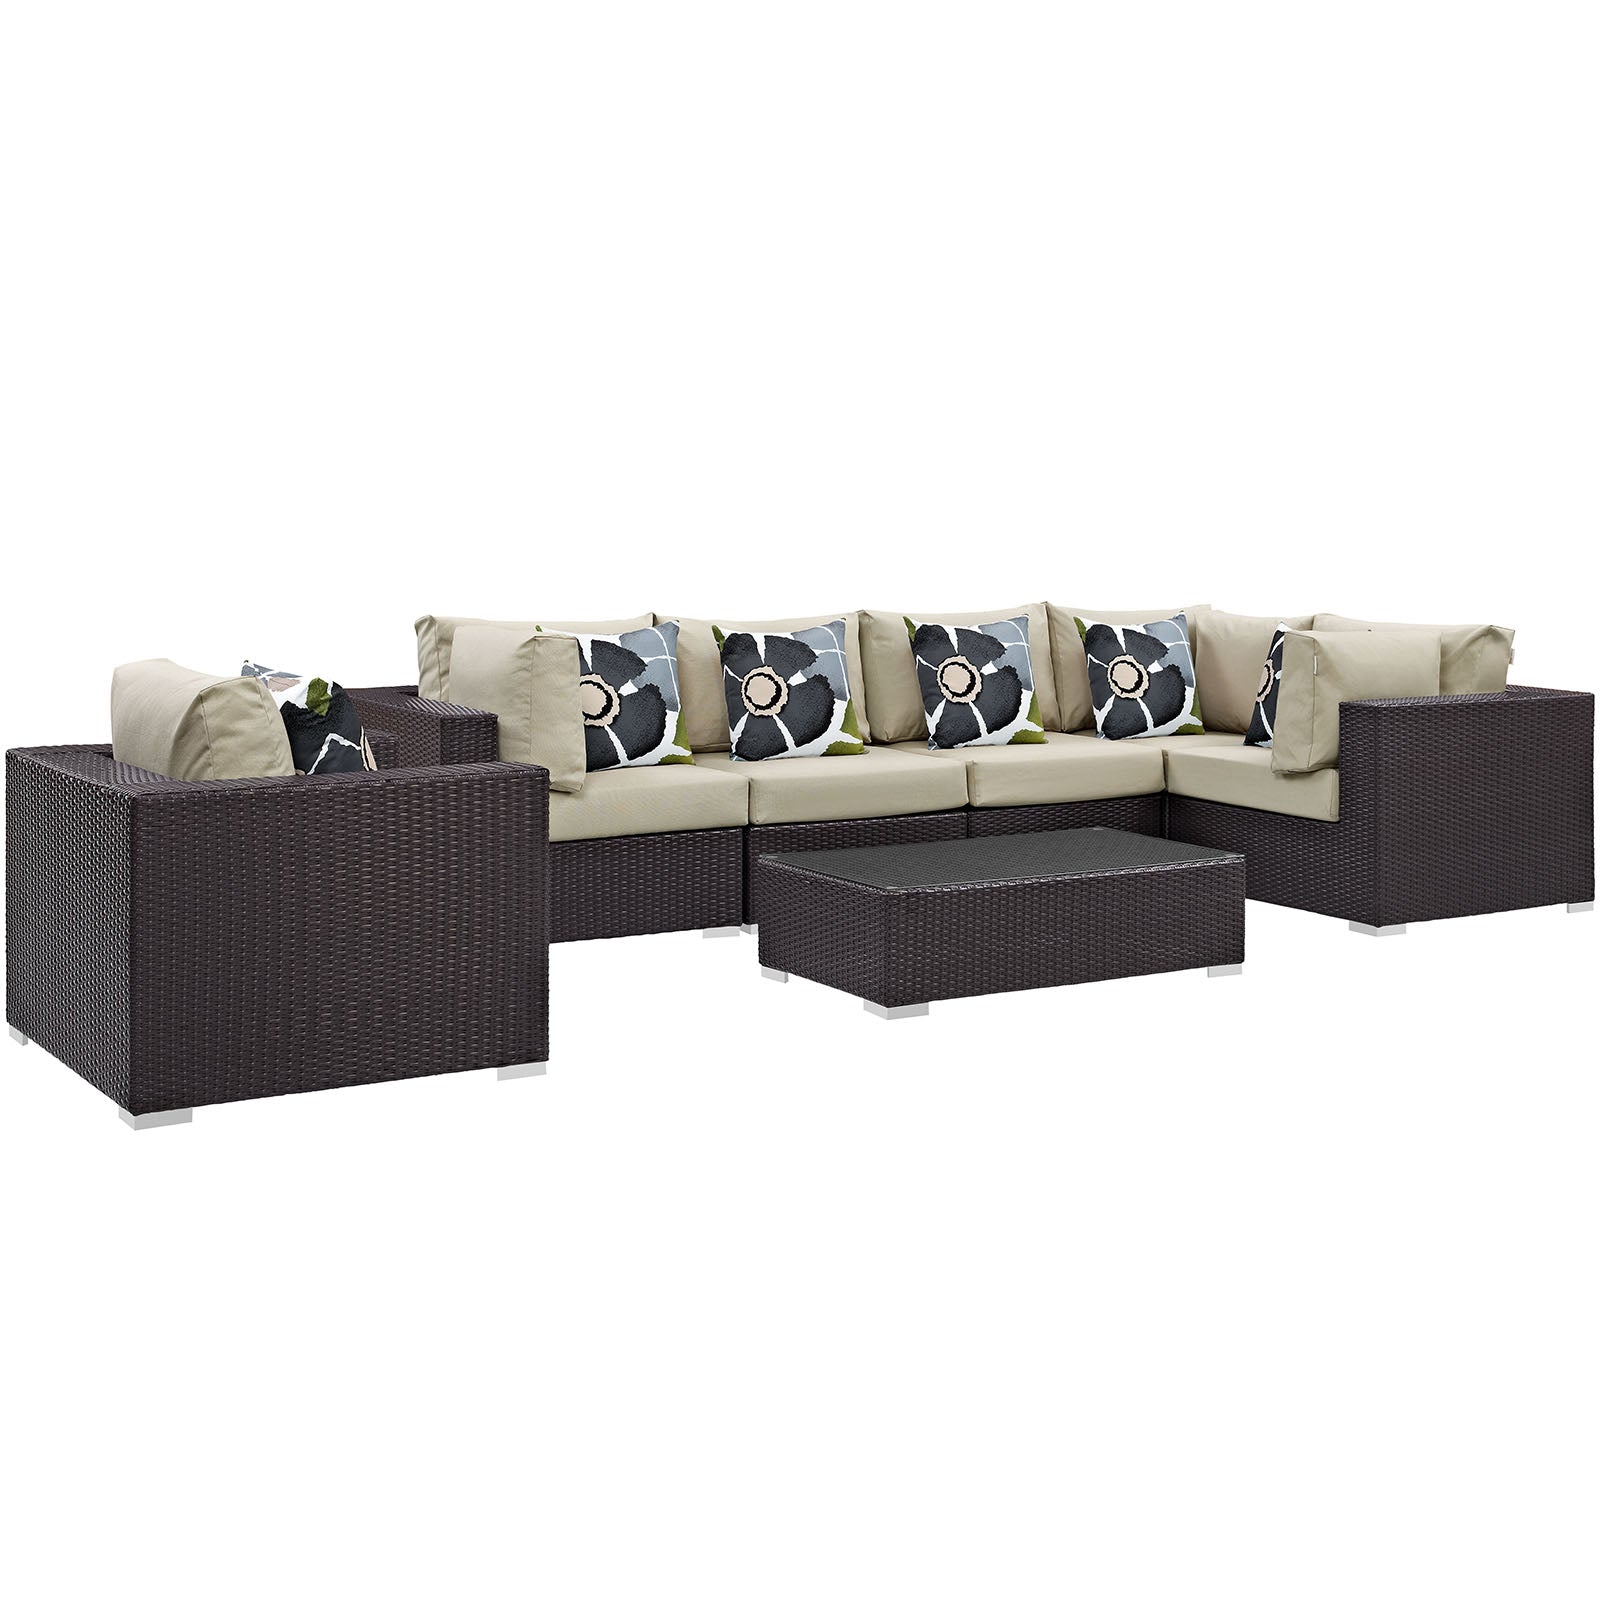 Convene 7 Piece Outdoor Patio Sectional Set W/ Coffee Table